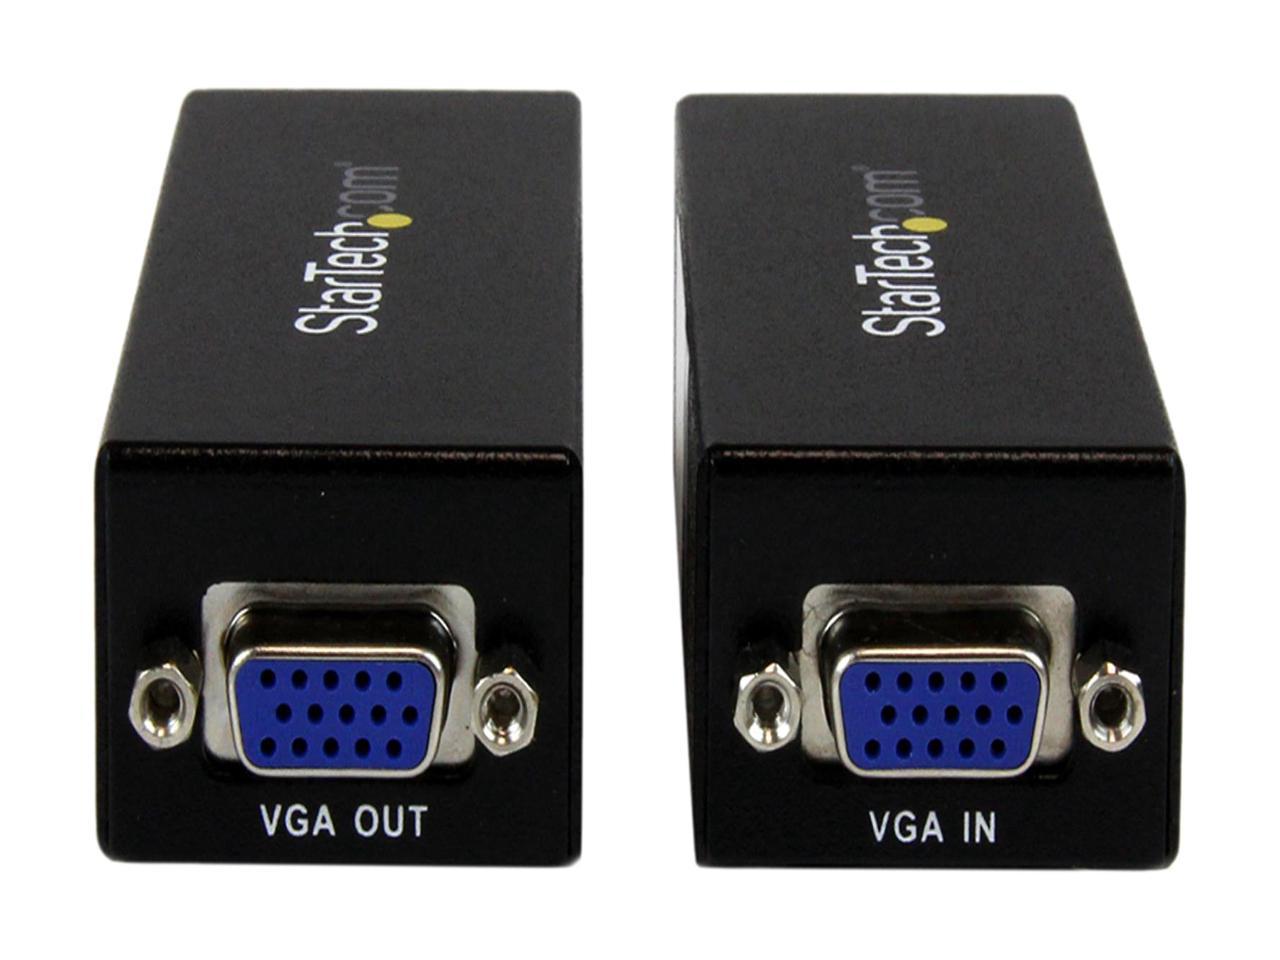 StarTech.com ST121UTPEP VGA to Cat 5 Monitor Extender Kit (250ft/80m) - VGA over Cat5 Video Extender - 1 Local and 1 Remote